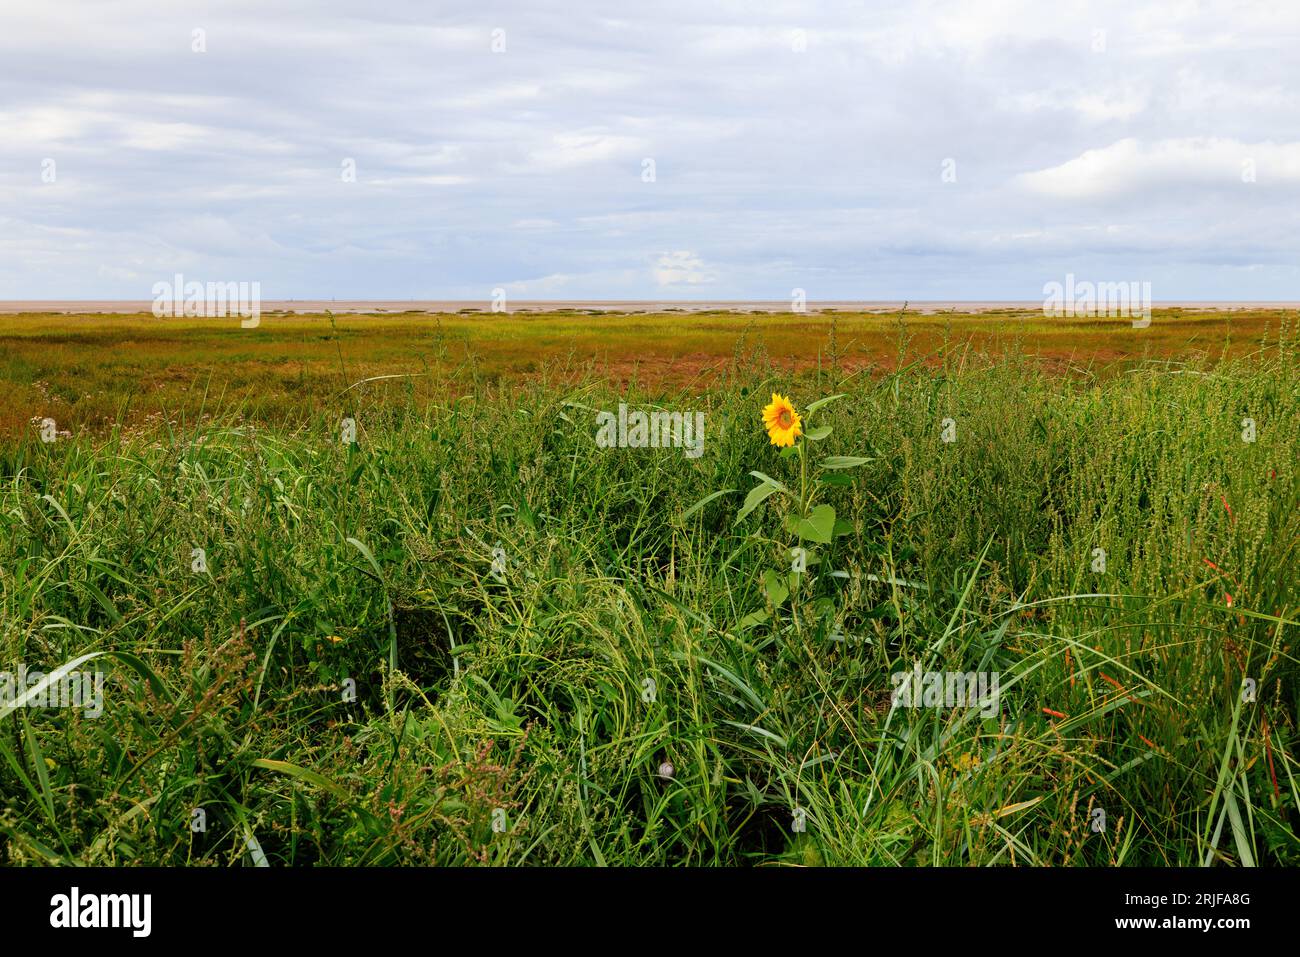 a solitary sunflower blooms in the low grassy sand dunes on st annes beach at low tide with marshy grass and sandy beach behind Stock Photo